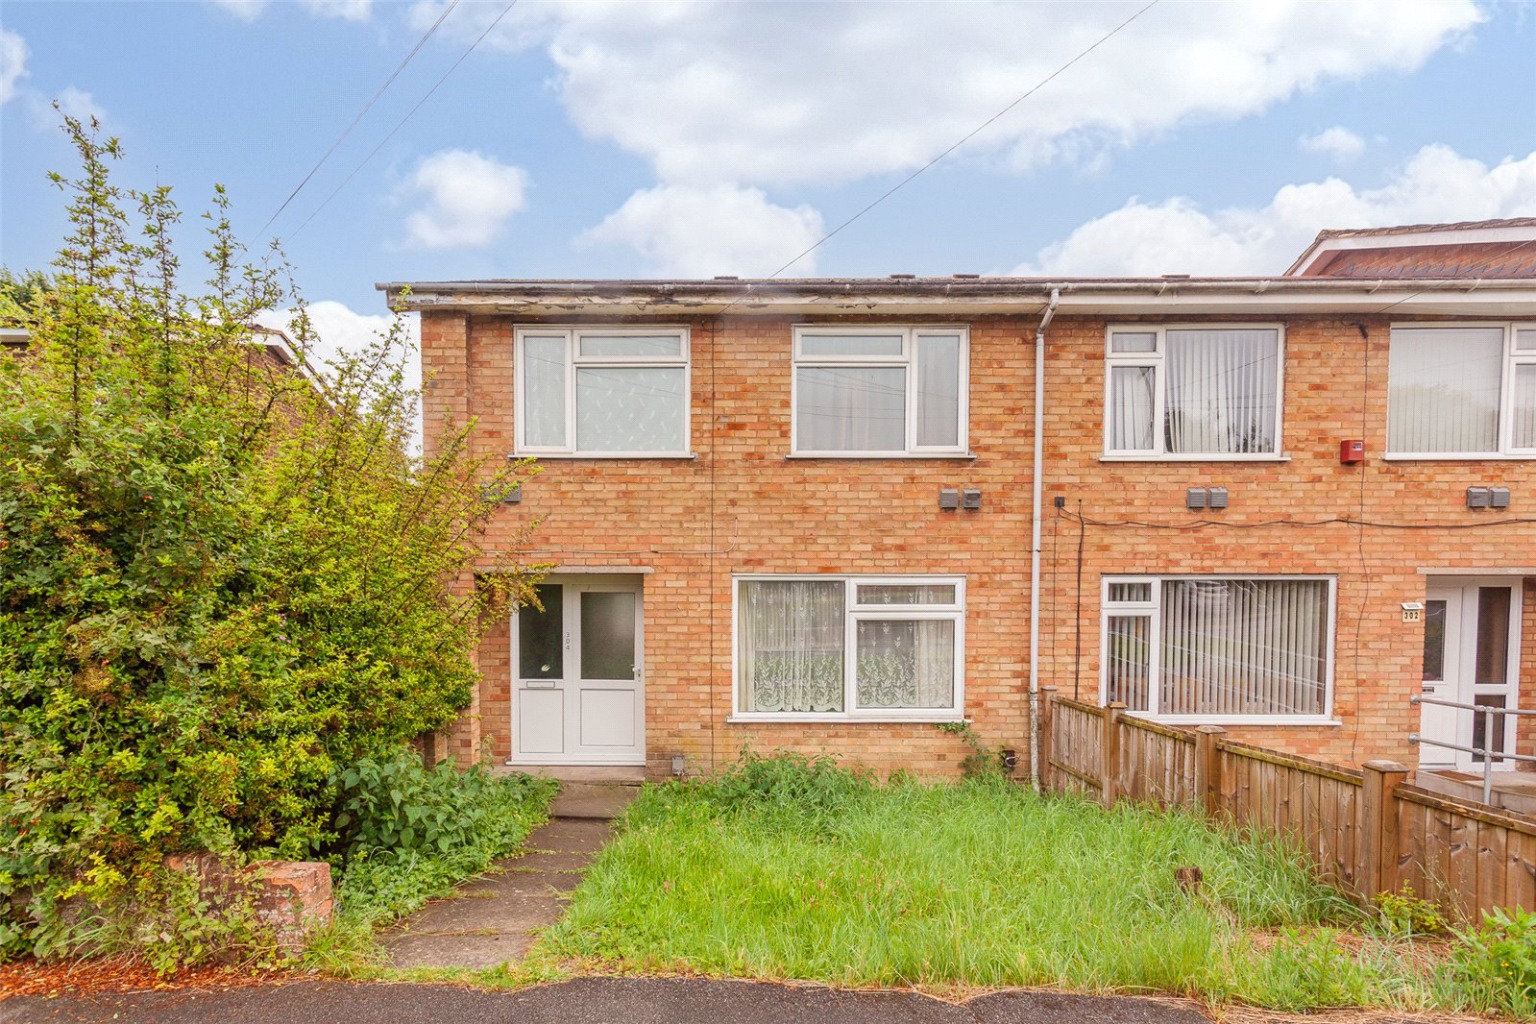 3 bed end of terrace house for sale in Crawley Green Road, Luton - Property Image 1